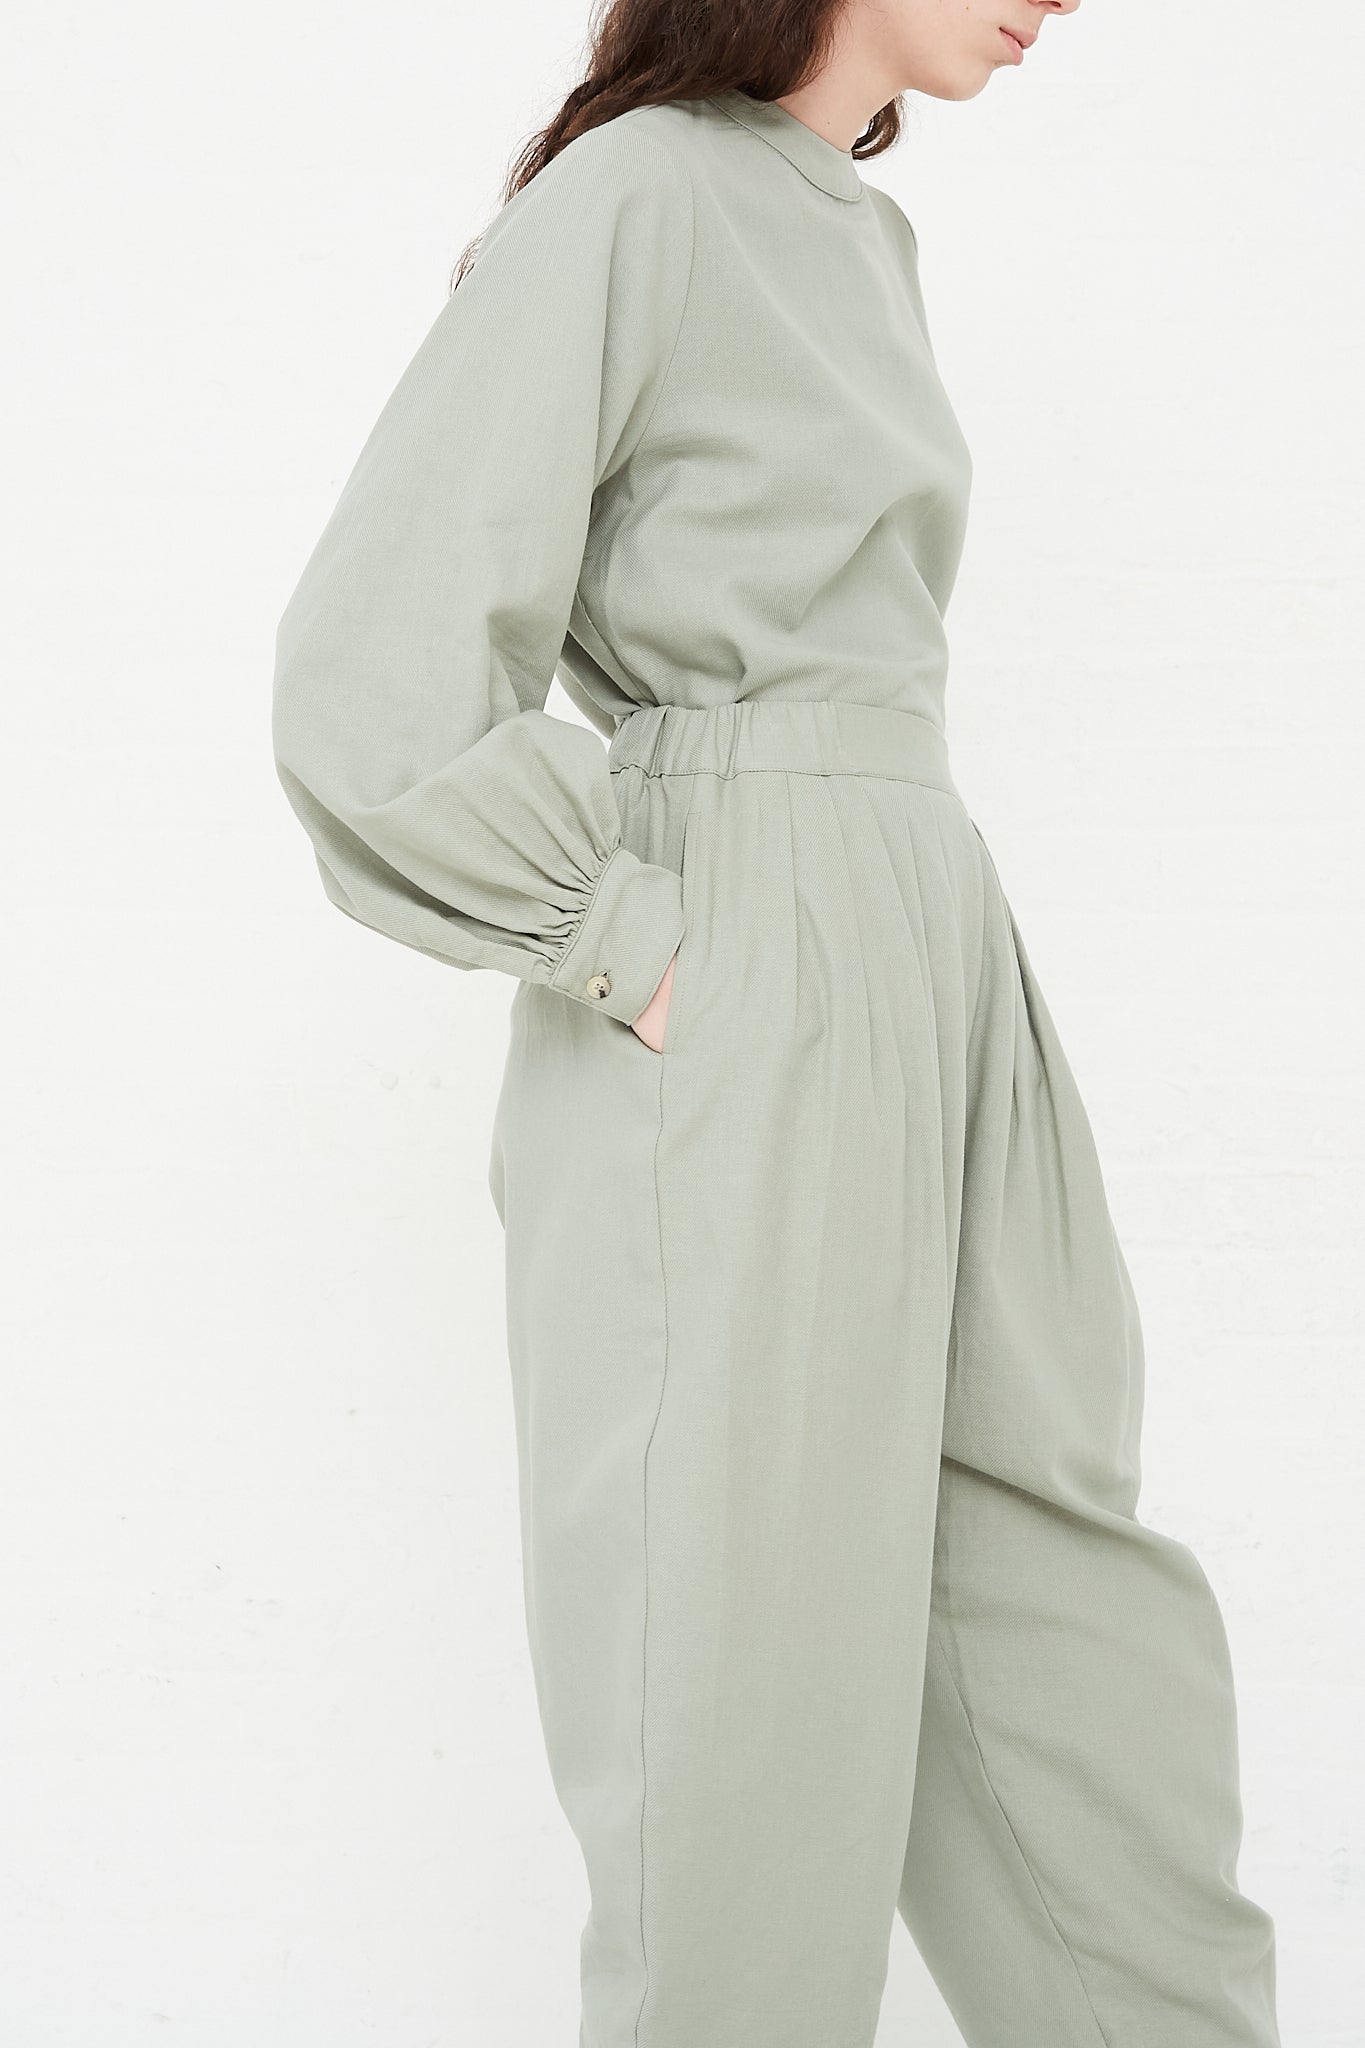 Cotton Twill Draped Pants in Agave by Black Crane for Oroboro Side 